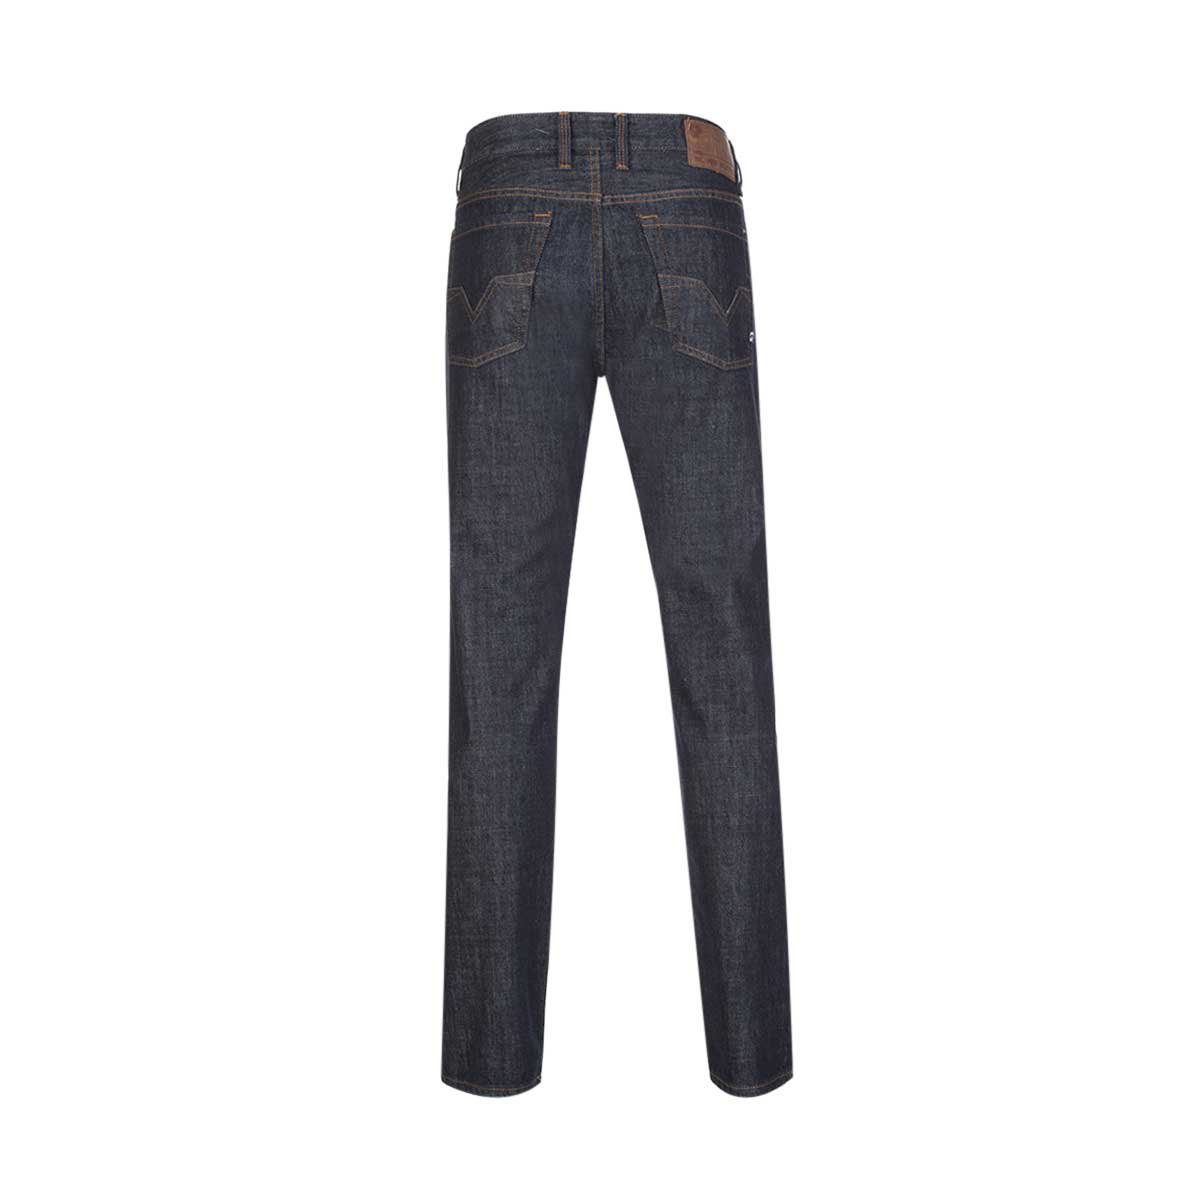 Jeans Relaxed Fit Silver Plate para Caballero